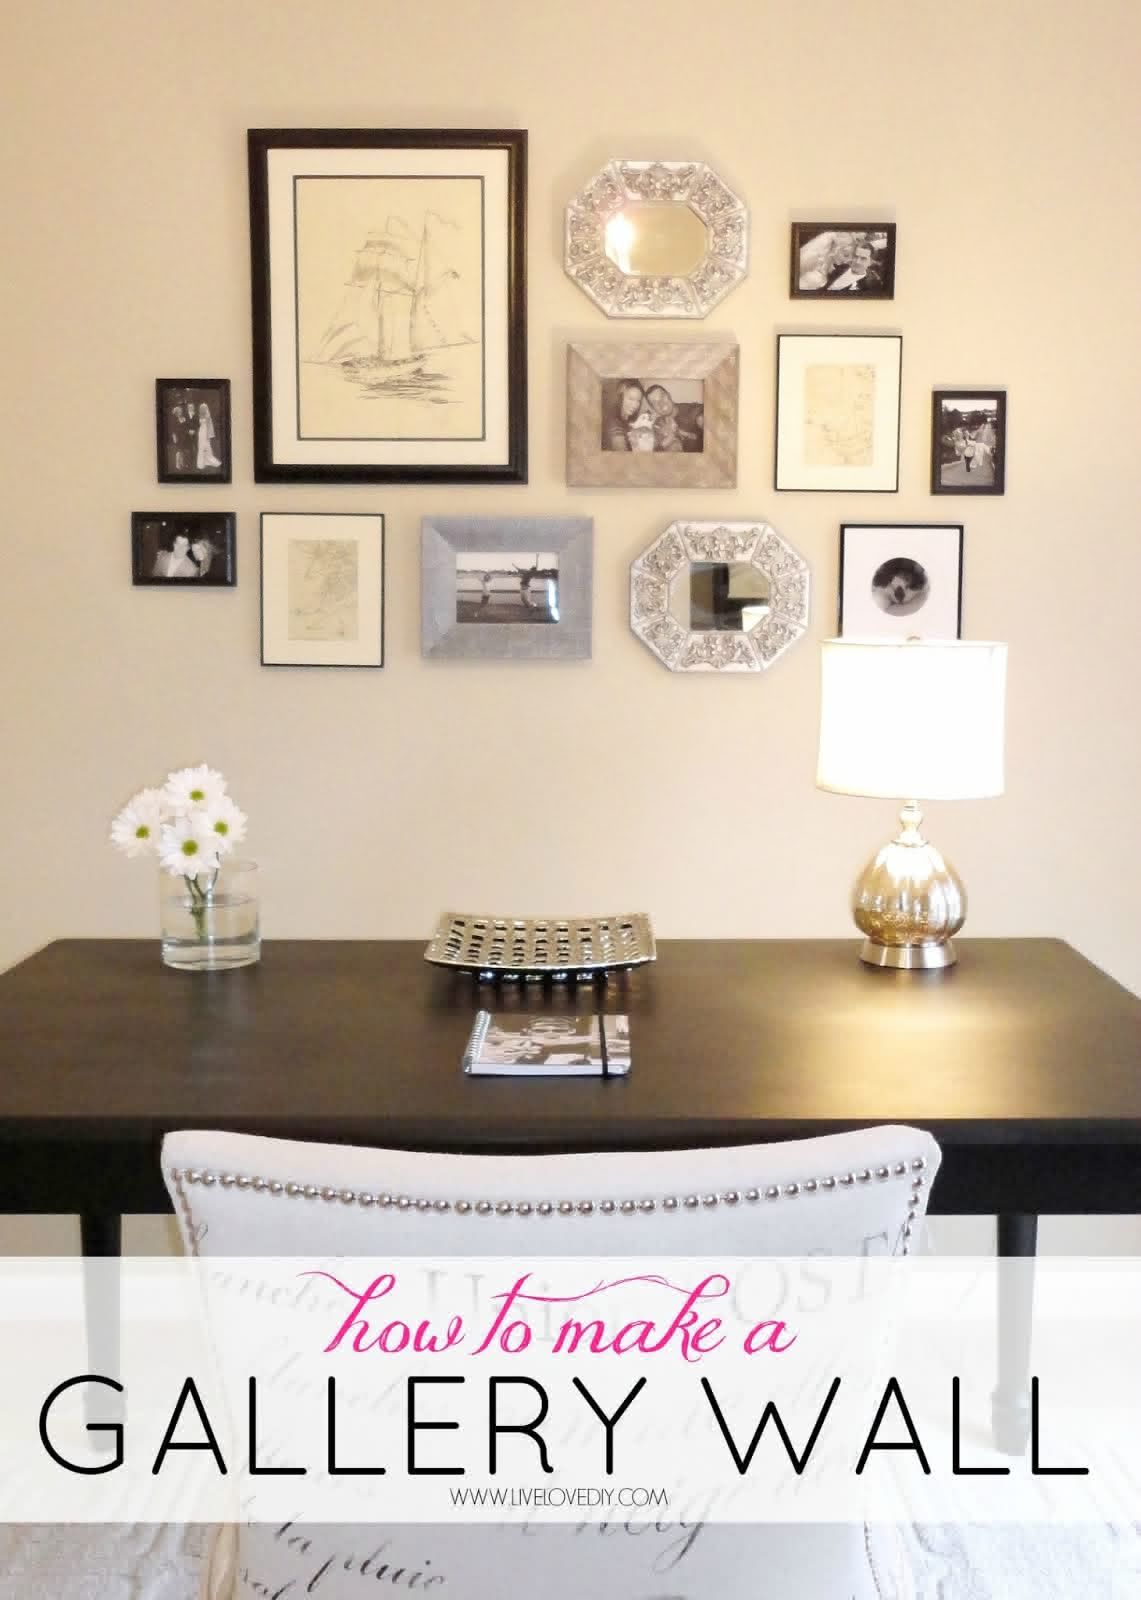 Affordable Home Decor Ideas: 5 Ways To Save Money